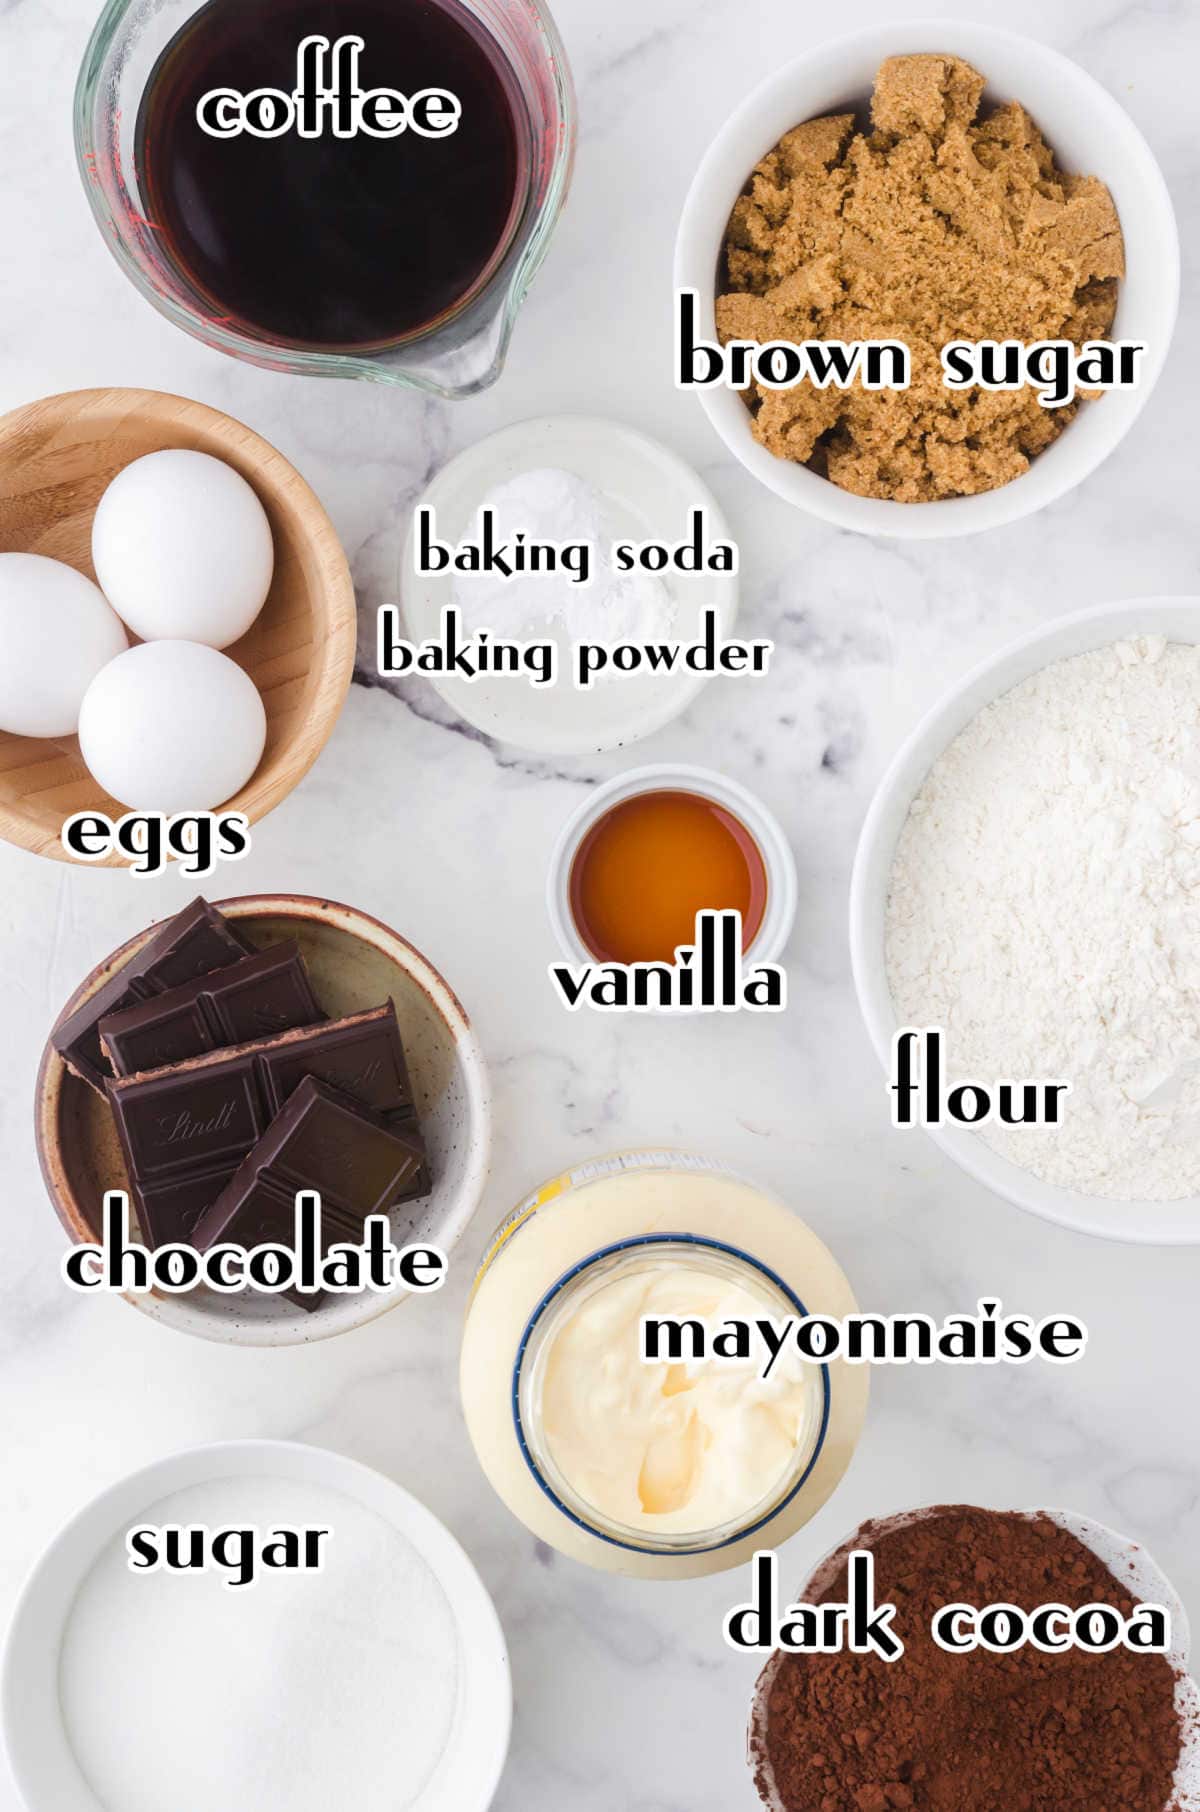 Ingredients for this cake.